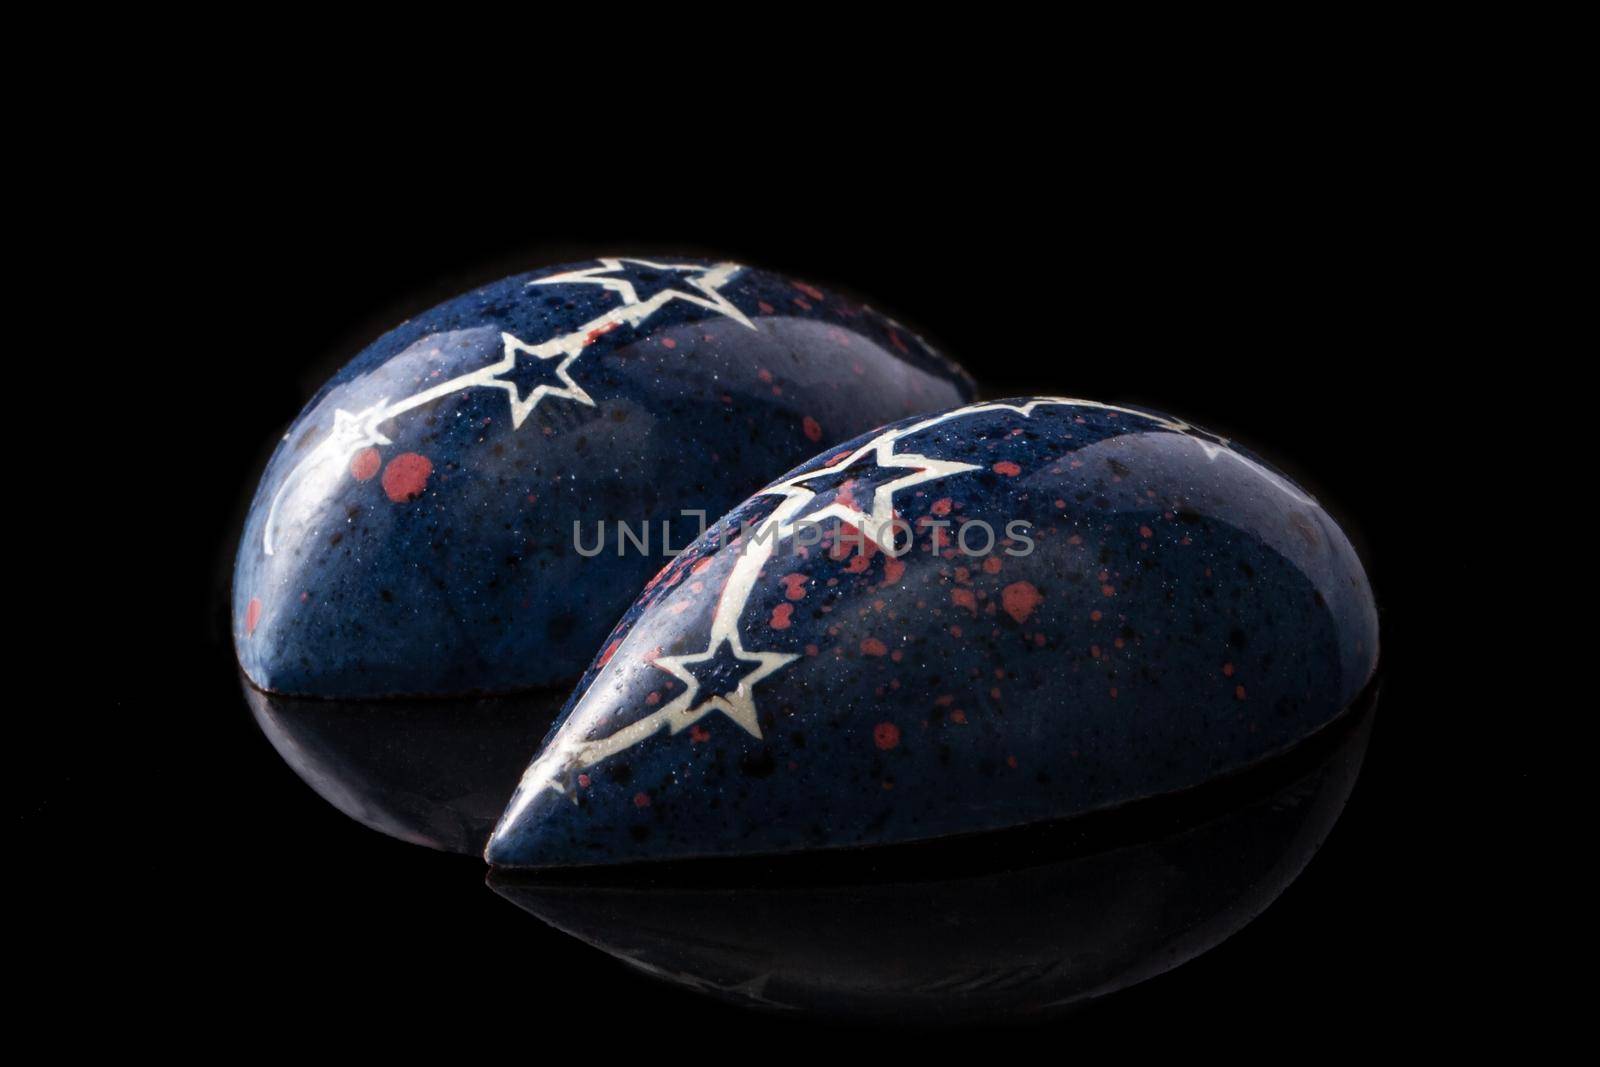 Dark blue luxury handmade chocolate candies with white stars on black background. Exclusive handcrafted bonbon. Product concept for chocolatier